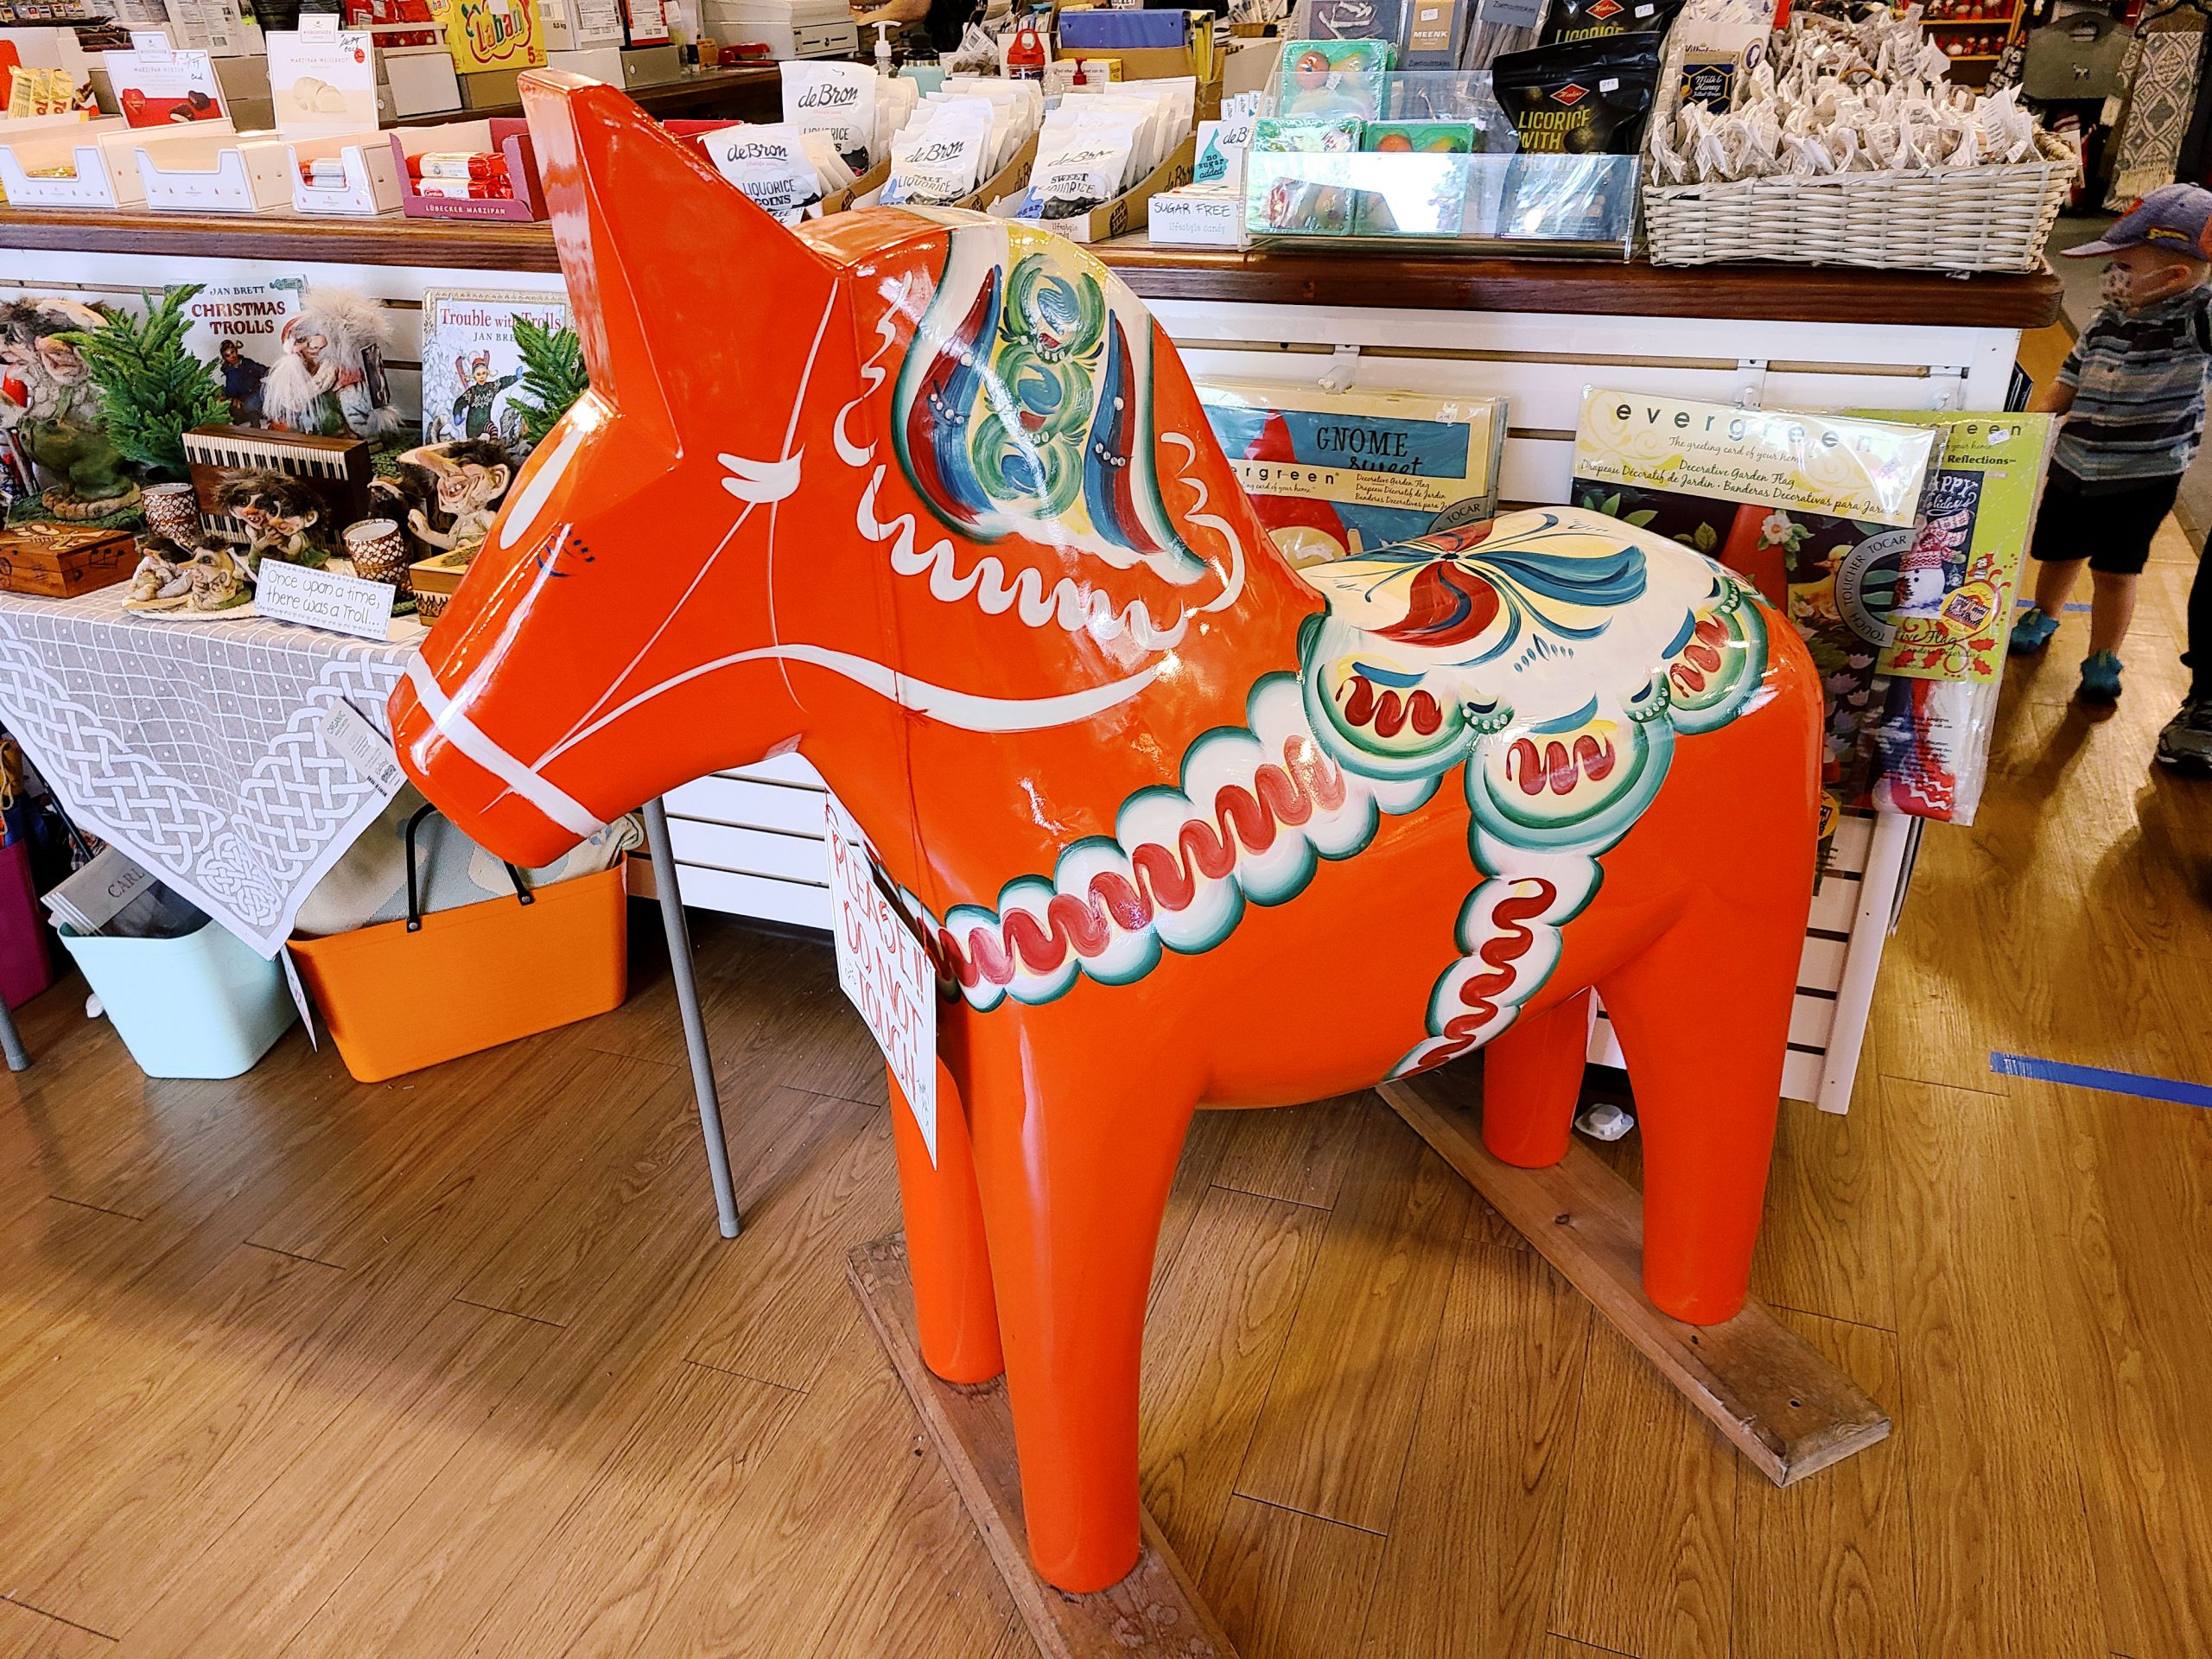 A colorful horse figurine at Bestemors